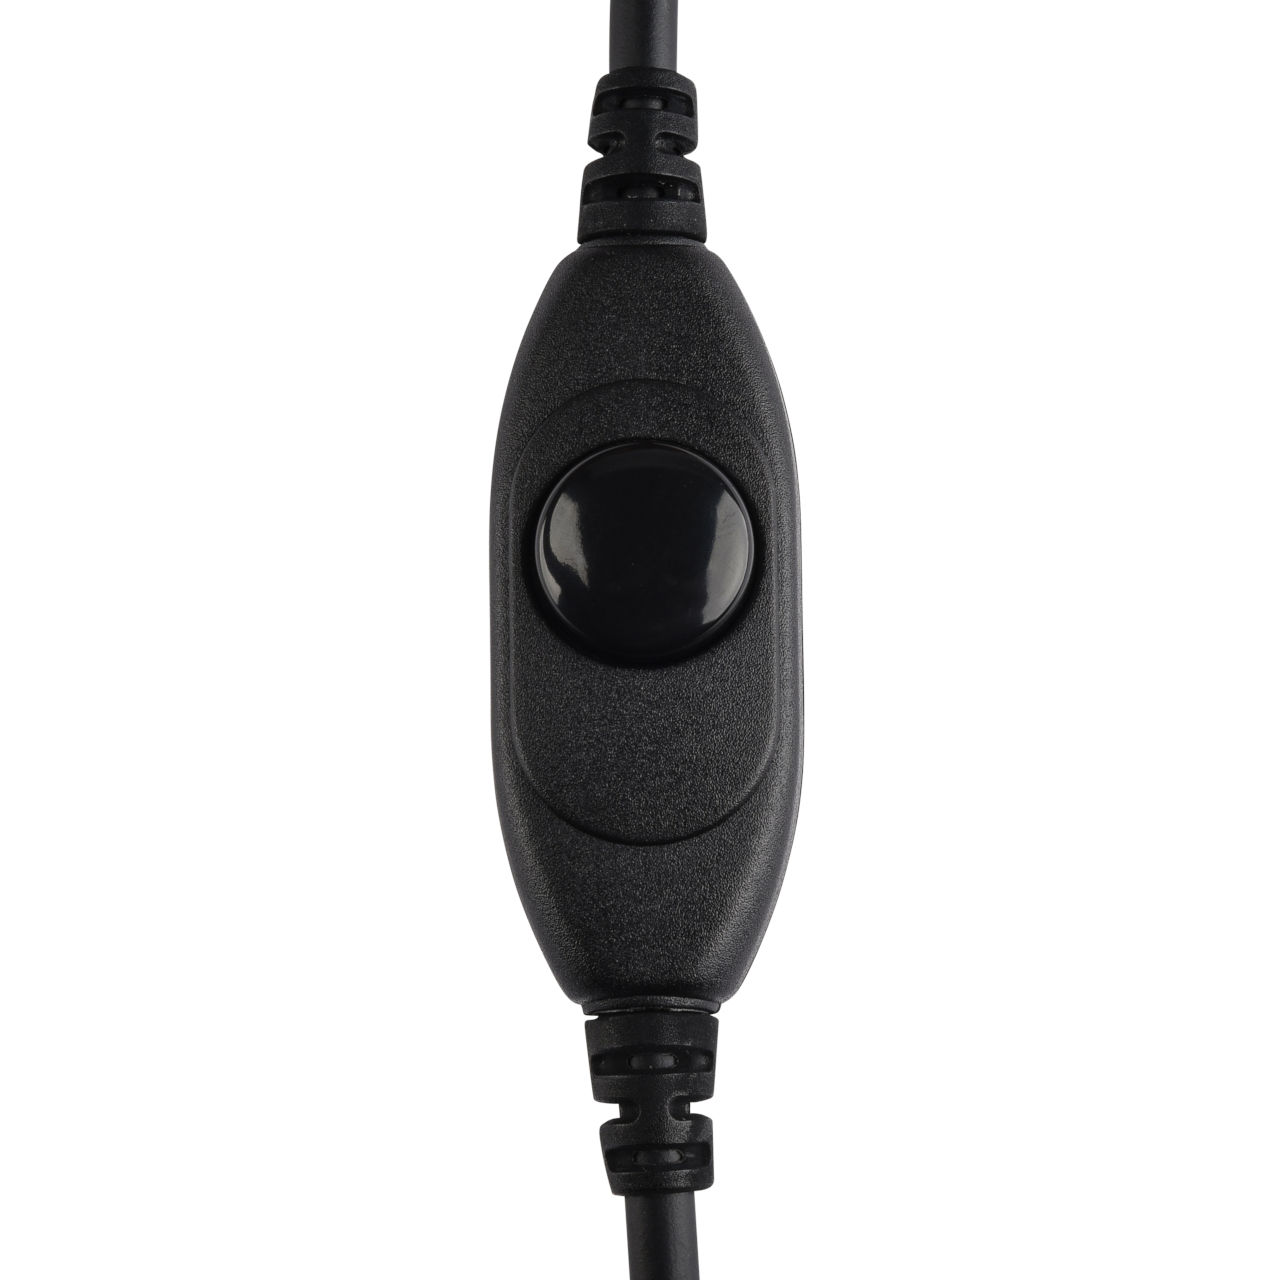 Motorola IMPRES Temple Transducer with PTT and Noise Cancelling Microphone